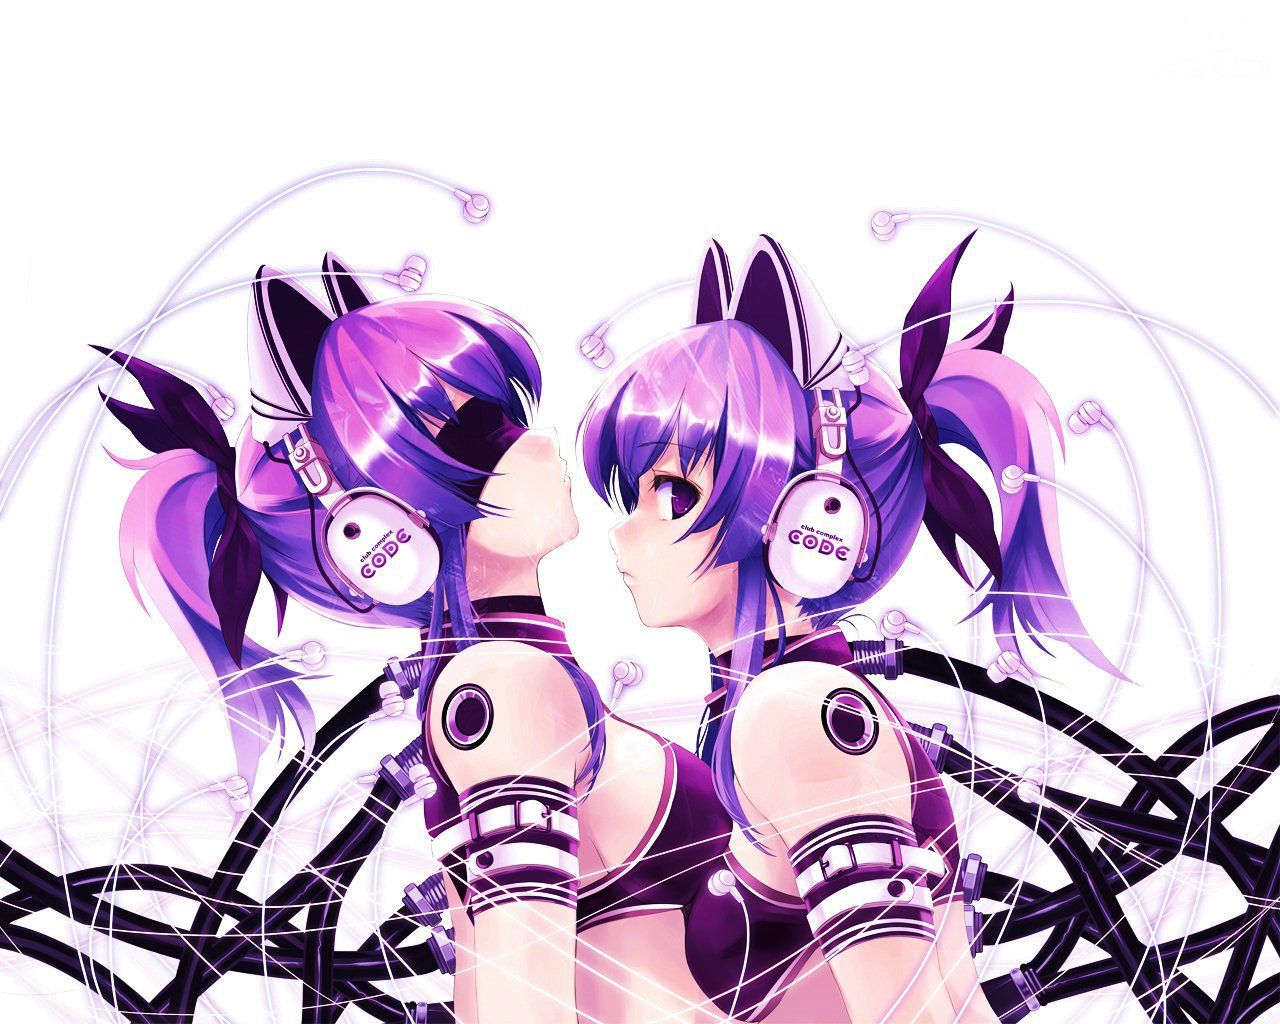 [2nd] Secondary image of a cute girl doing headphones [non-erotic] 23